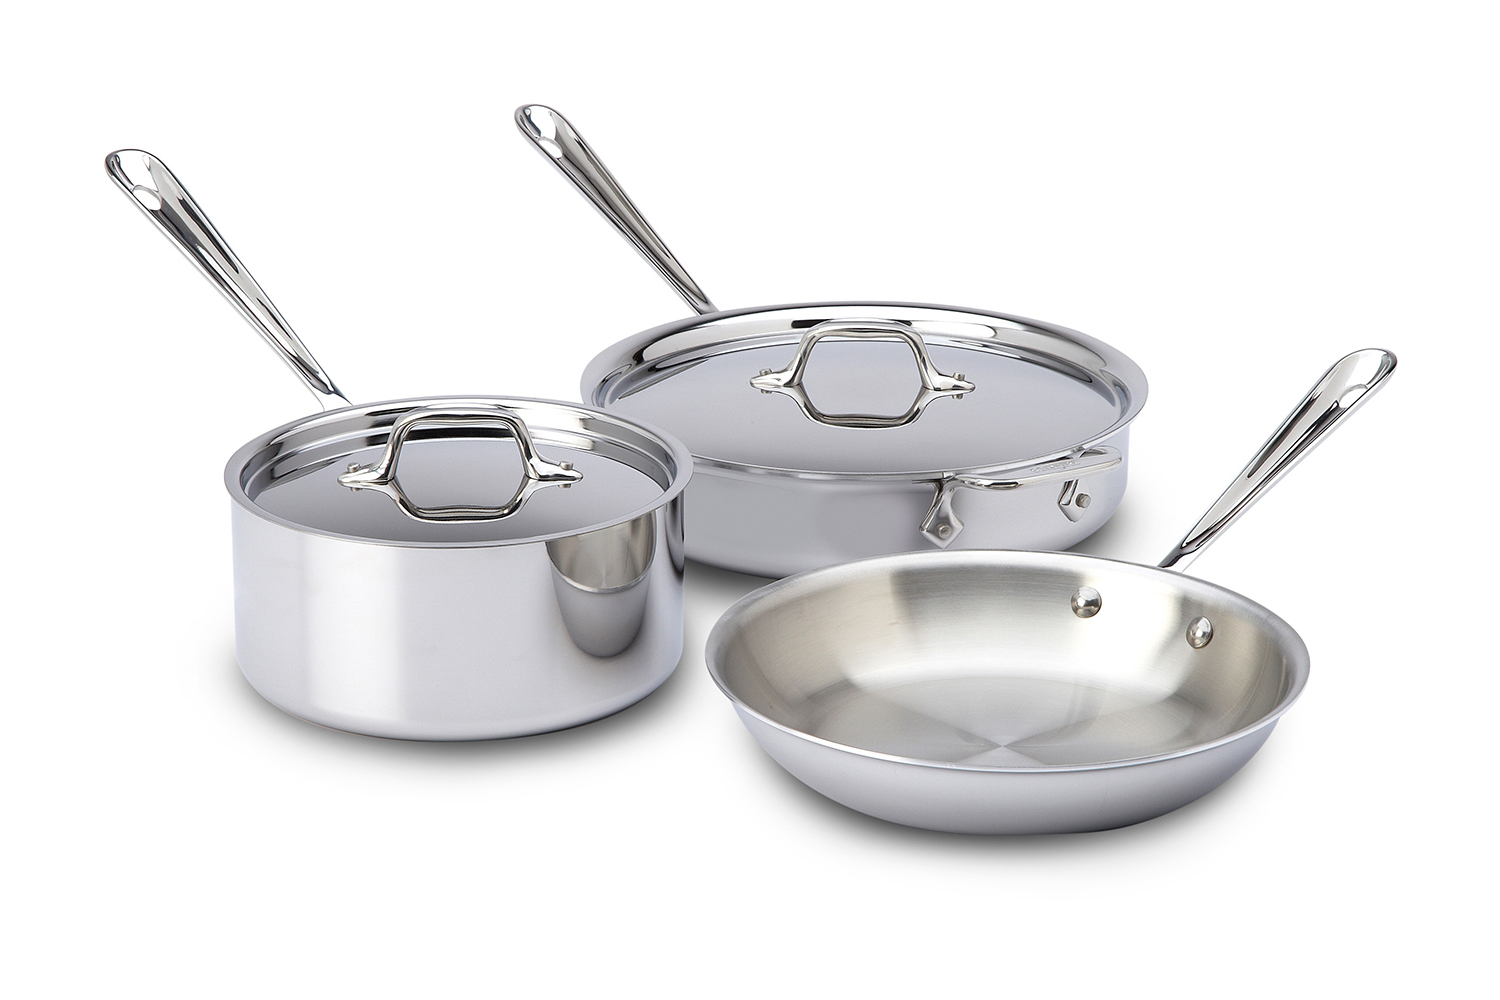 All Clad Stainless Steel Nonstick 5-Piece Tool Set